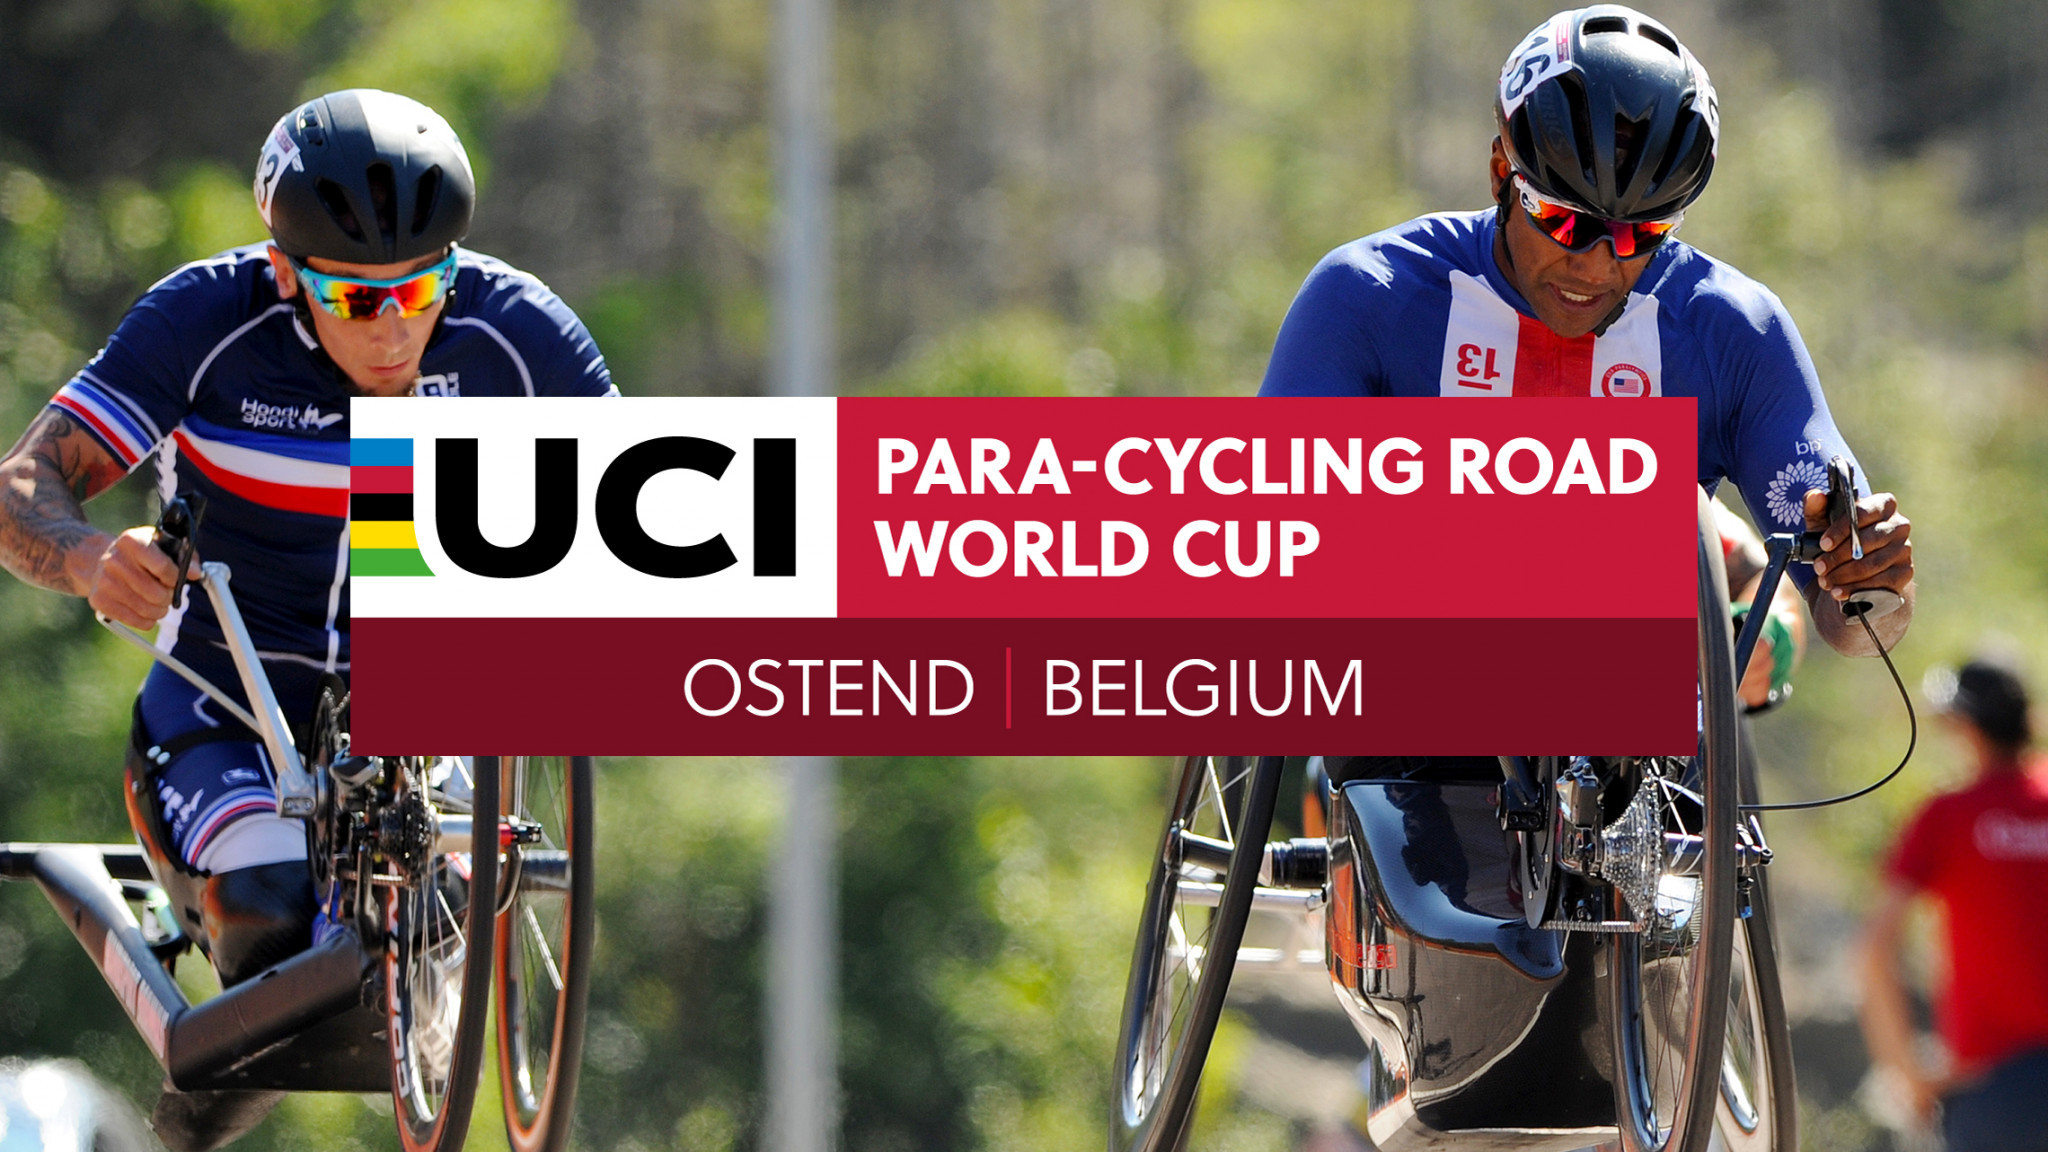 Time trials held on opening day of UCI Para-cycling World Cup in Ostend